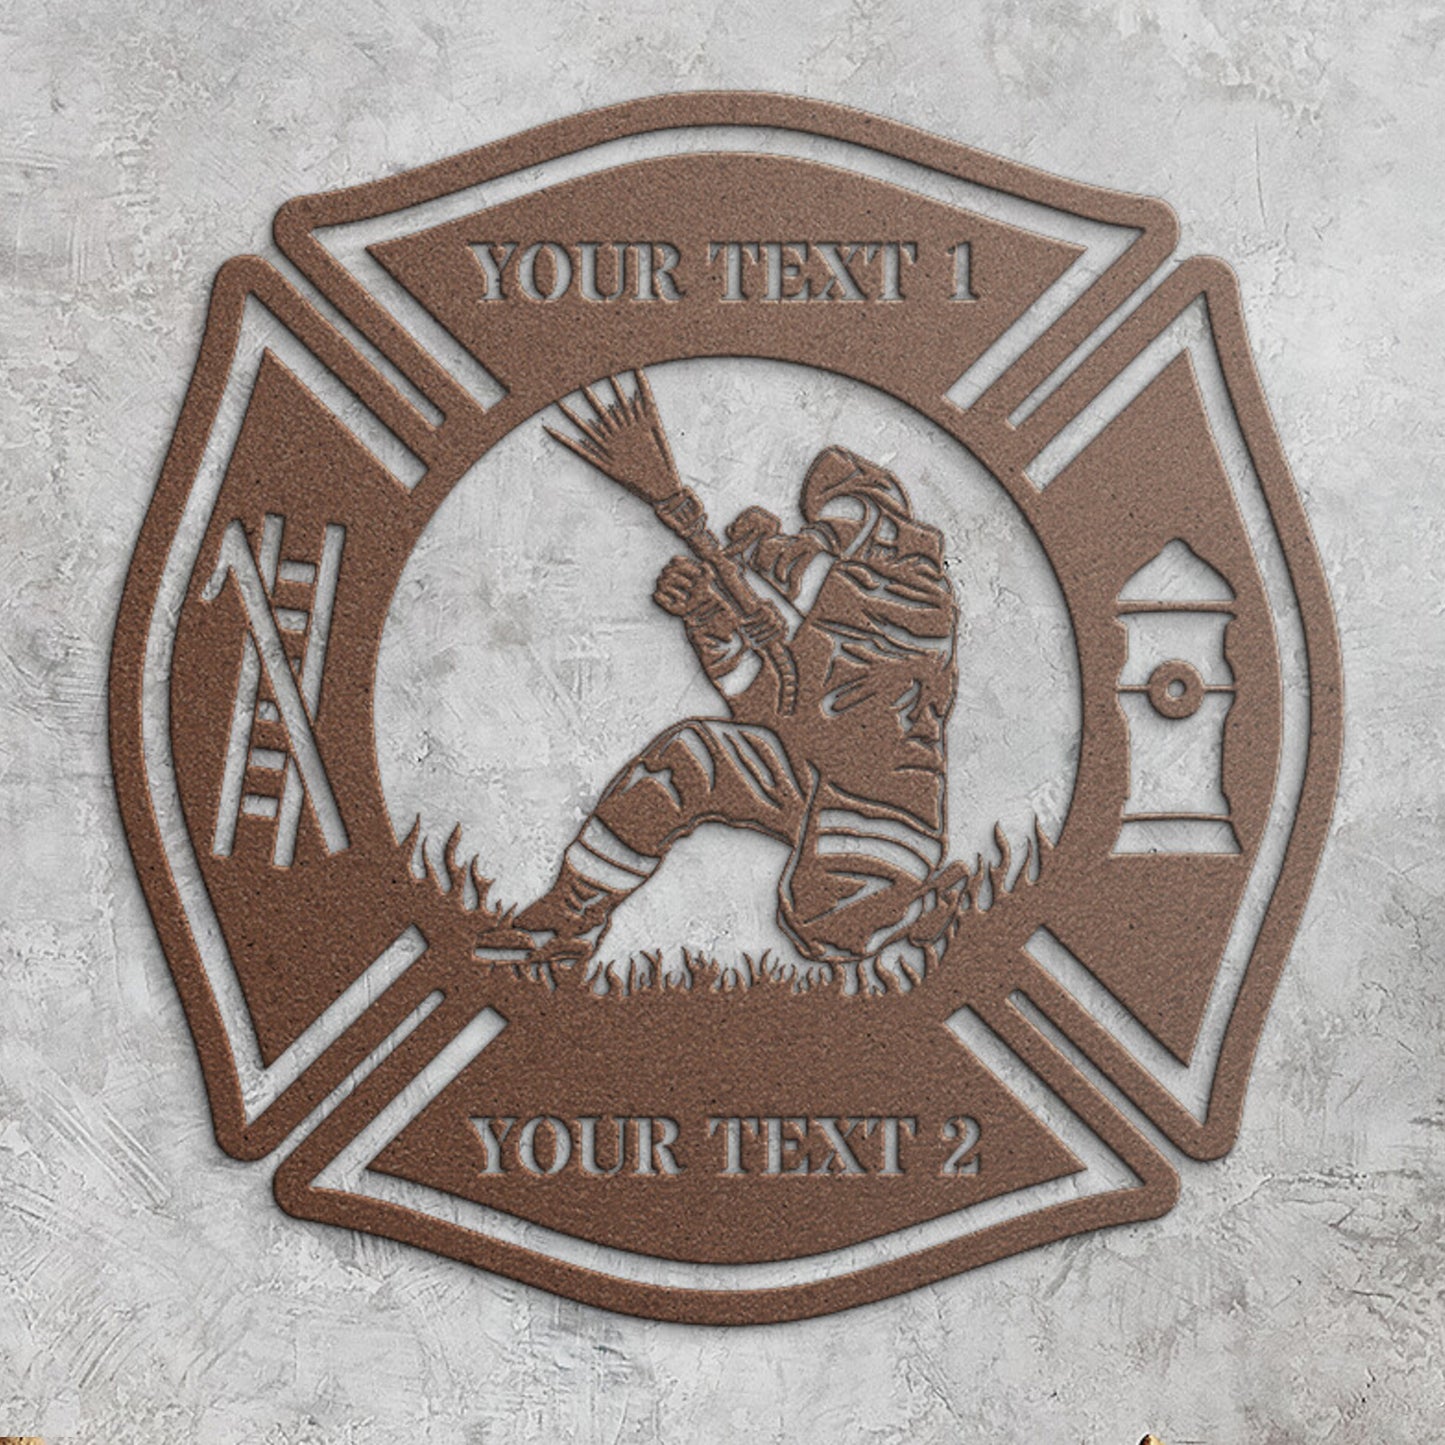 Personalized Fireman With Water Hose In Maltes Cross, Custom Firefighter Maltese Cross Wall Art Decor, Customize Fire Department Steel Sign